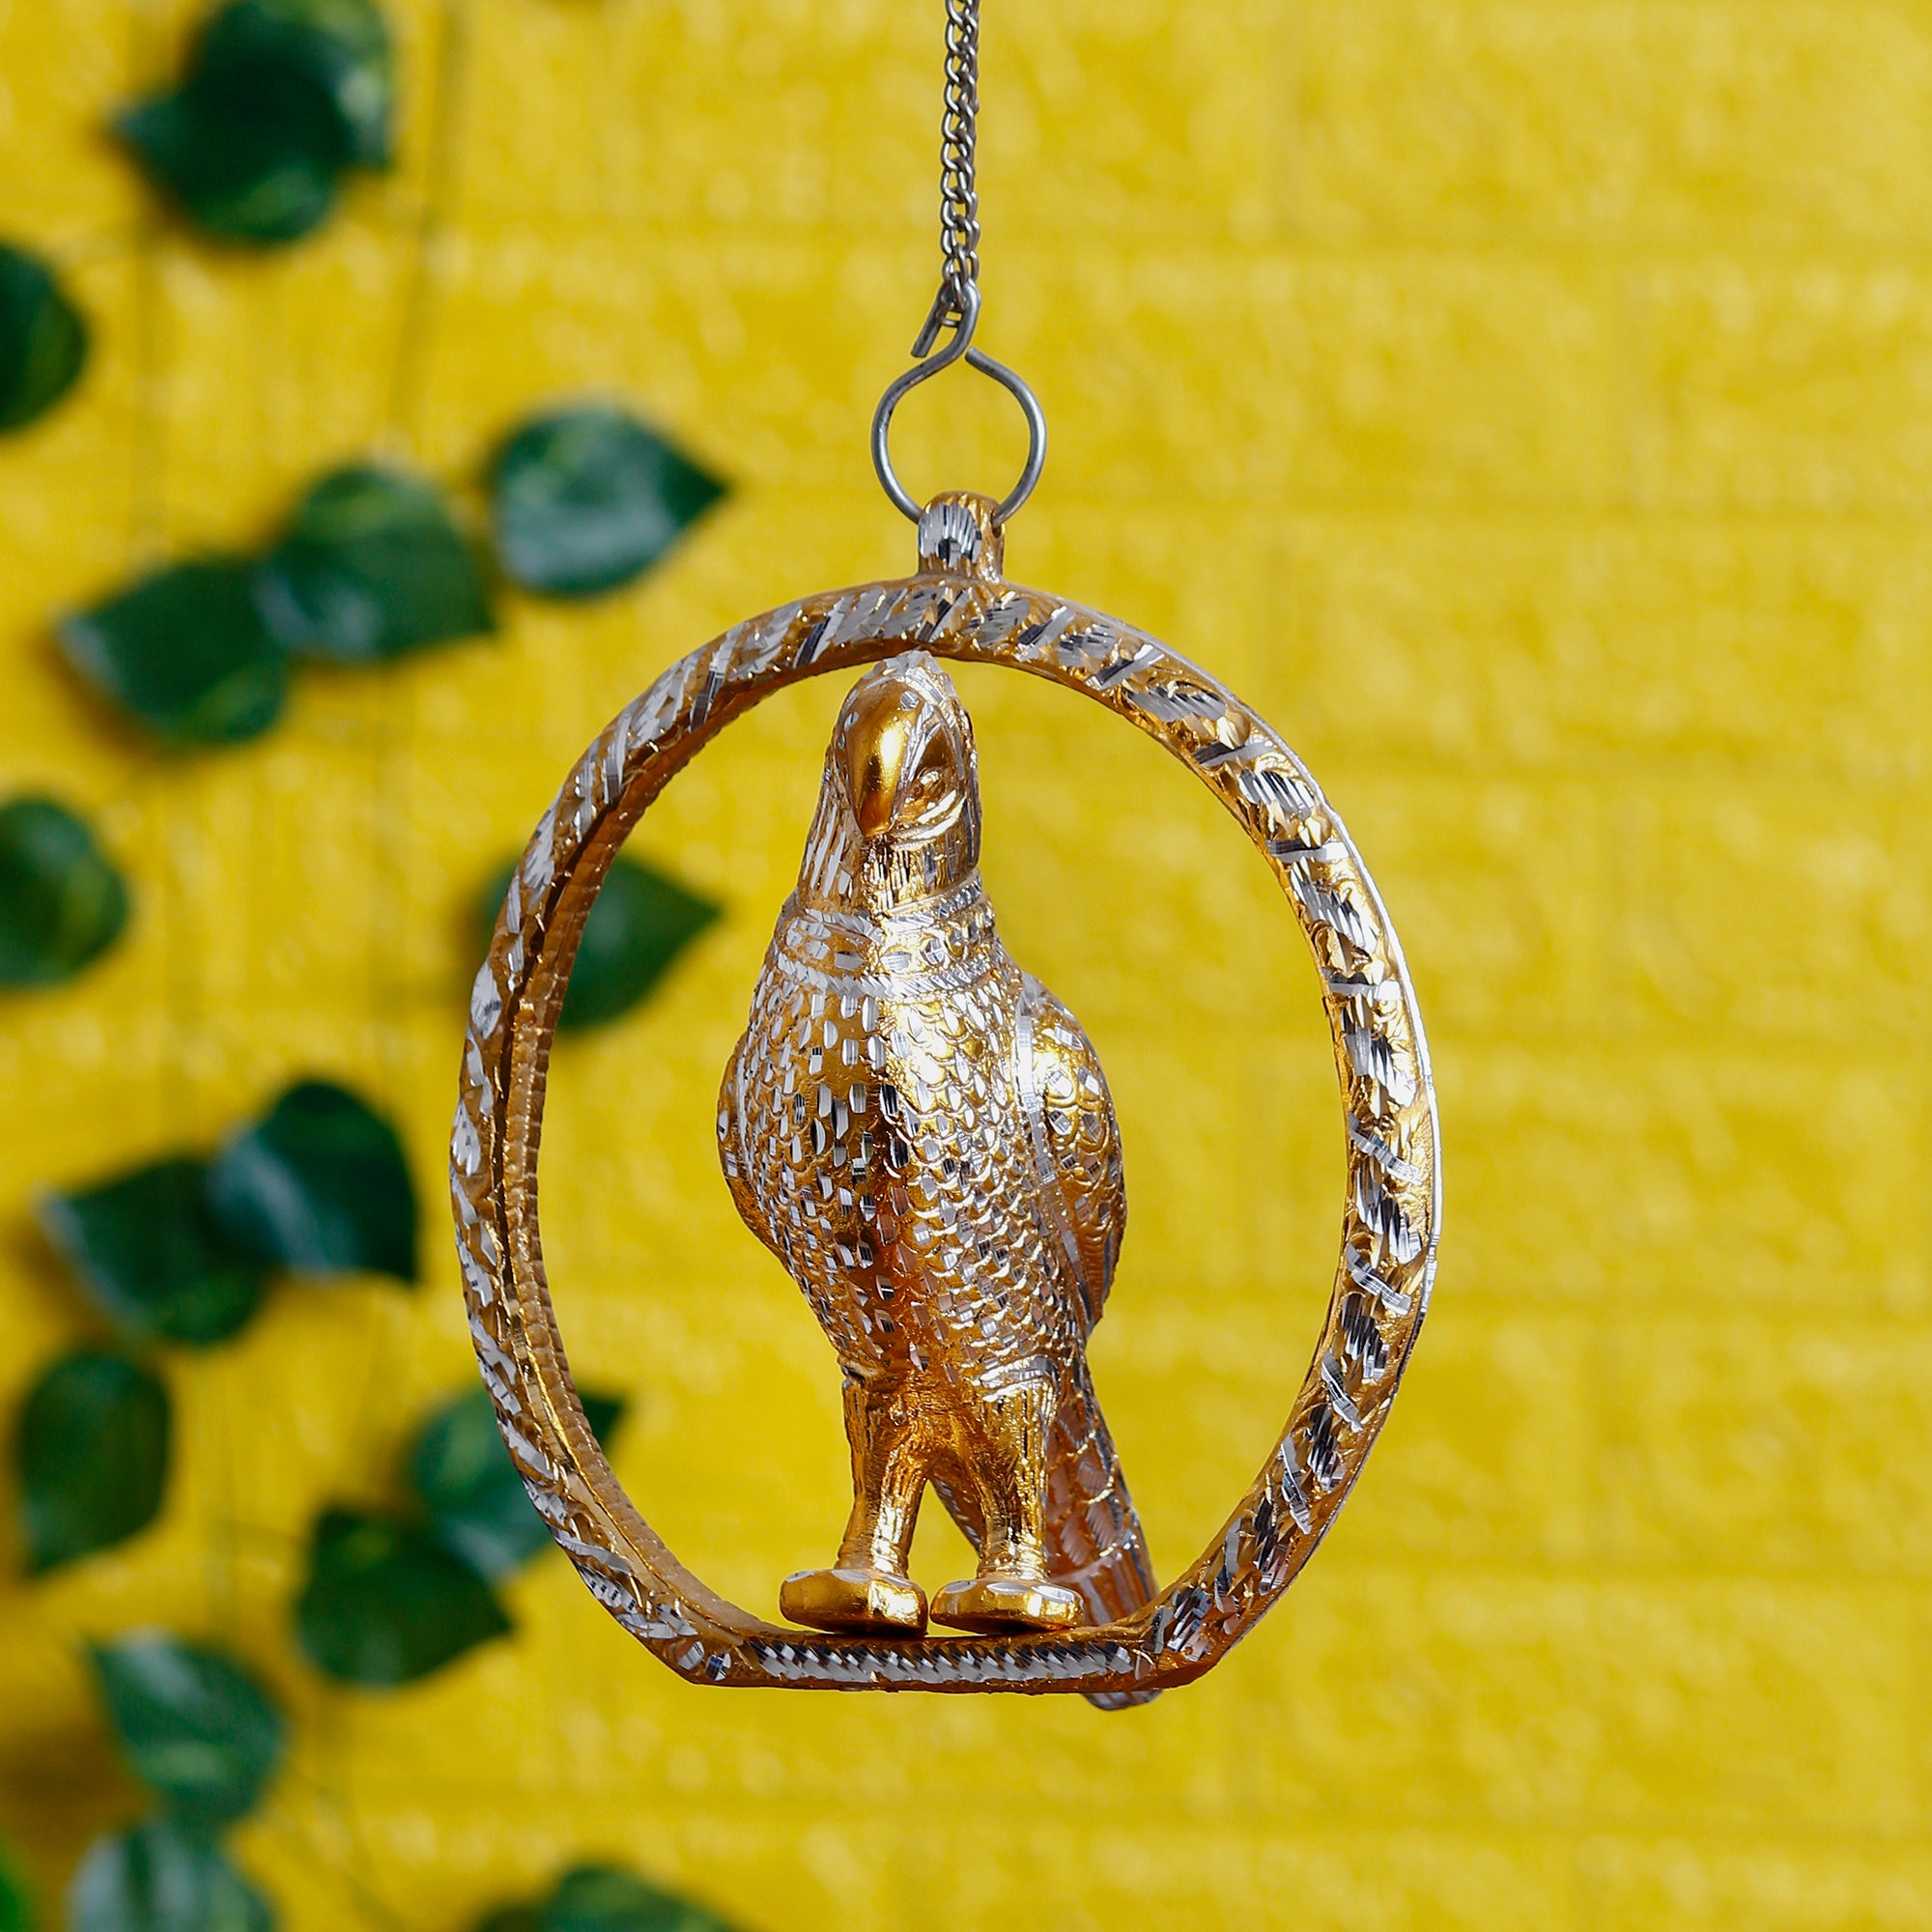 Metal Carved Golden Parrot Statue Decorative Wall Hanging Showpiece with Chain